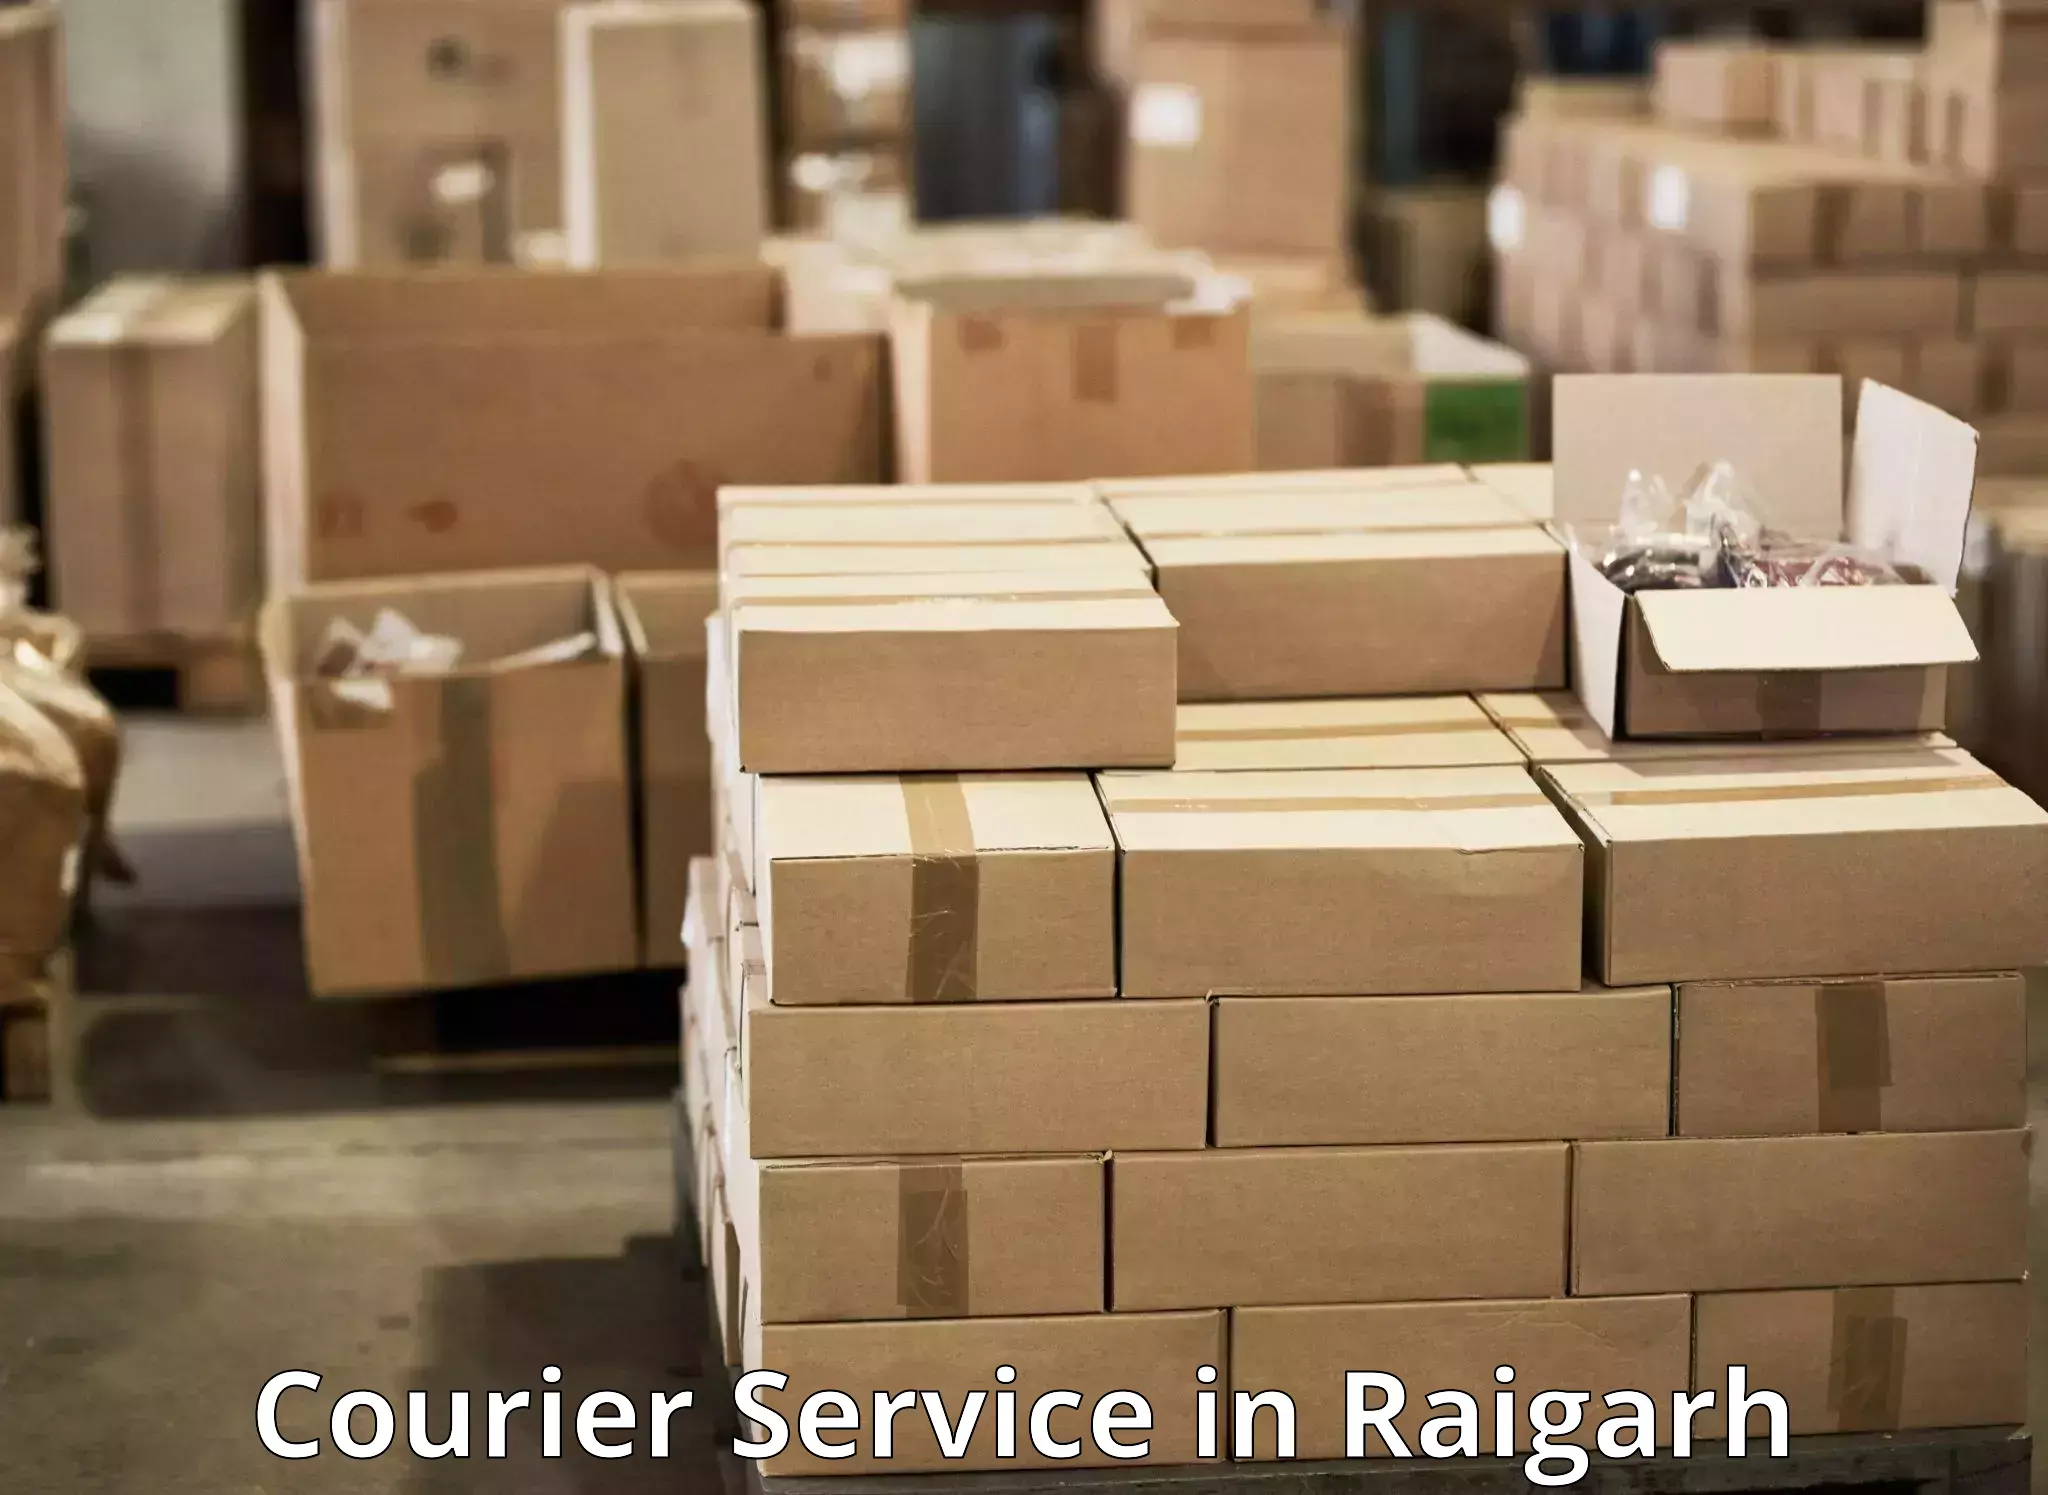 Customer-focused courier in Raigarh